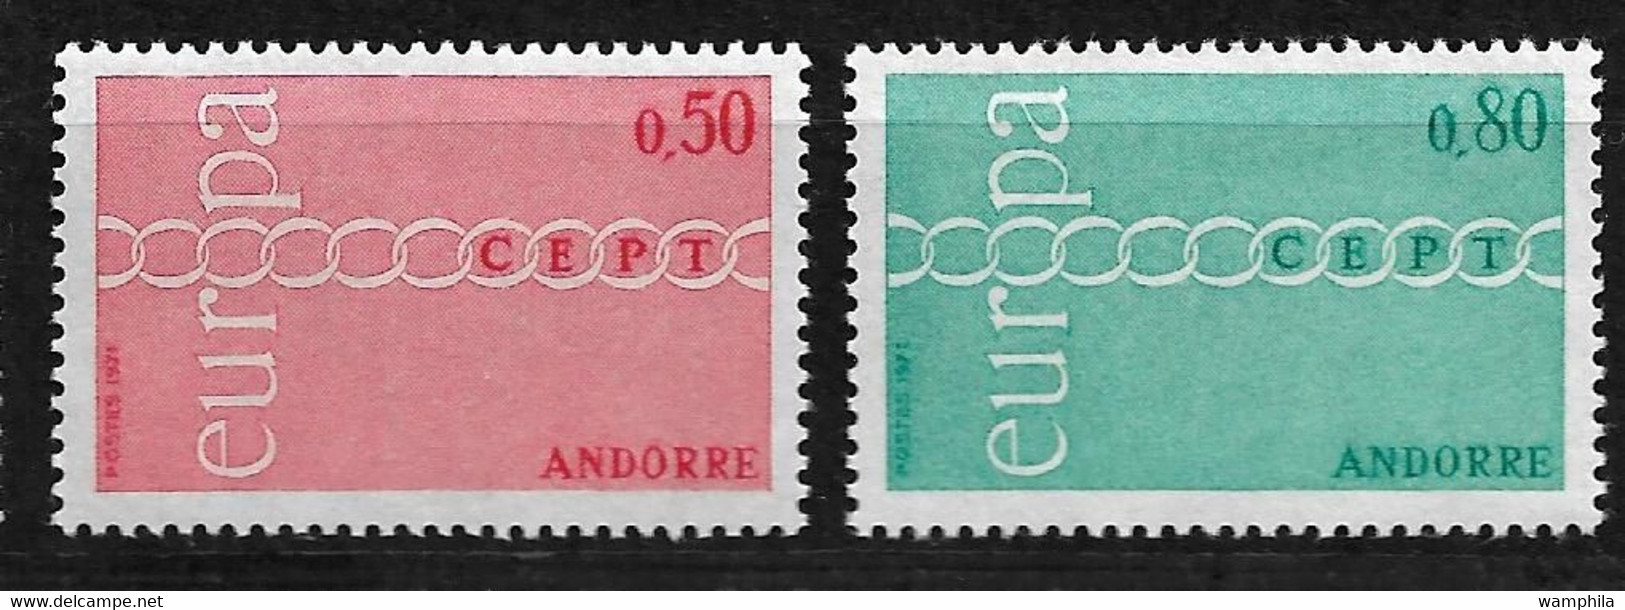 Andorre Europa N°179/80, 212/13, 226/27, 237/38, 243/44, 253/54, 329/30, 348/49,  358/59,**cote 253€. - Collections